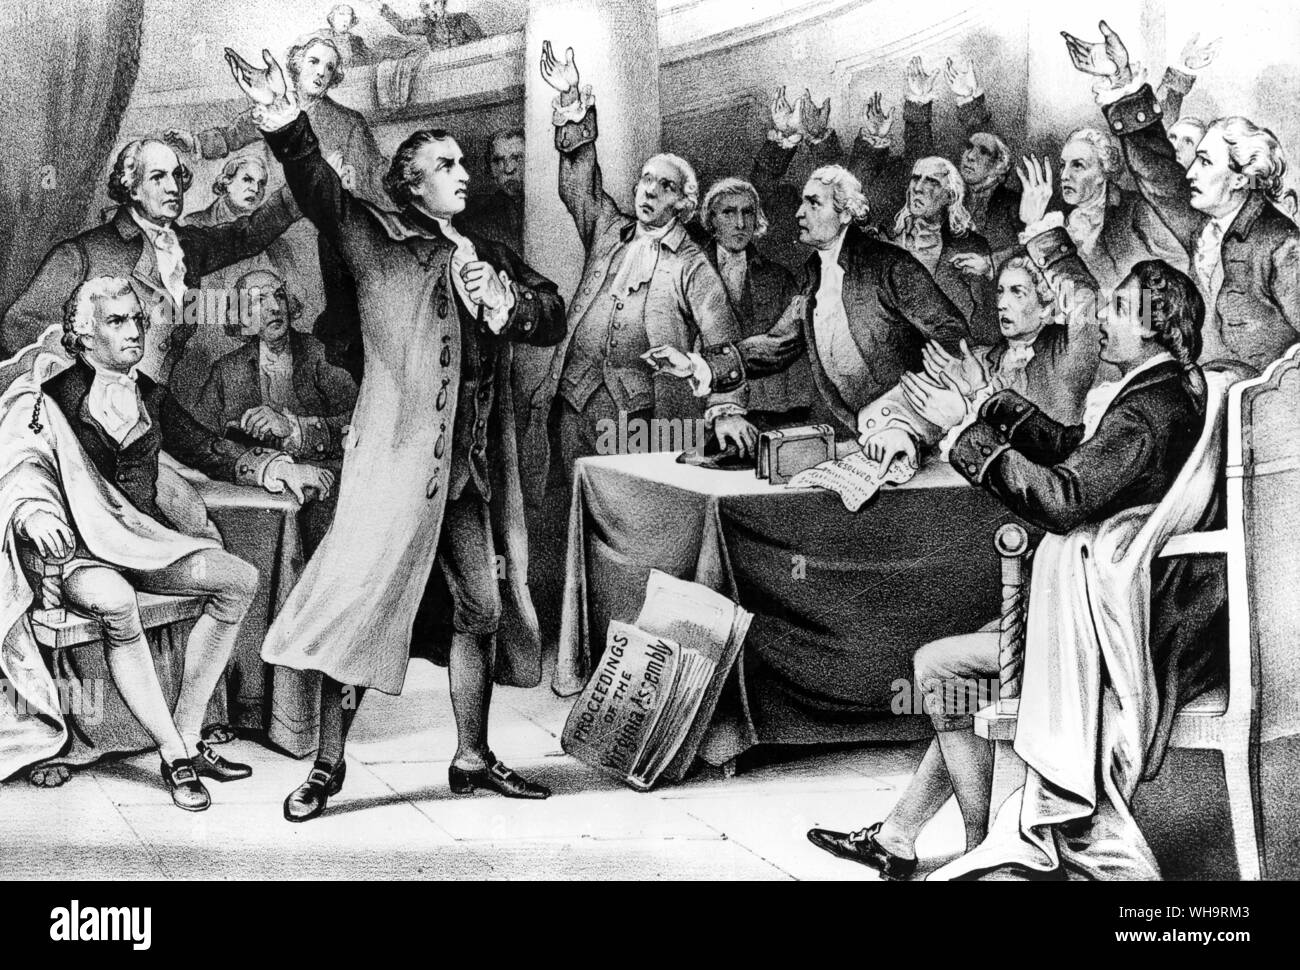 Give me liberty, or give me death! Patrick Henry delivering his great speech on the Rights of the Colonies before the Virginia assembly covened at March 23rd, 1775. Concluding with the above sentiment, which became the war cry of the Revolution. Stock Photo